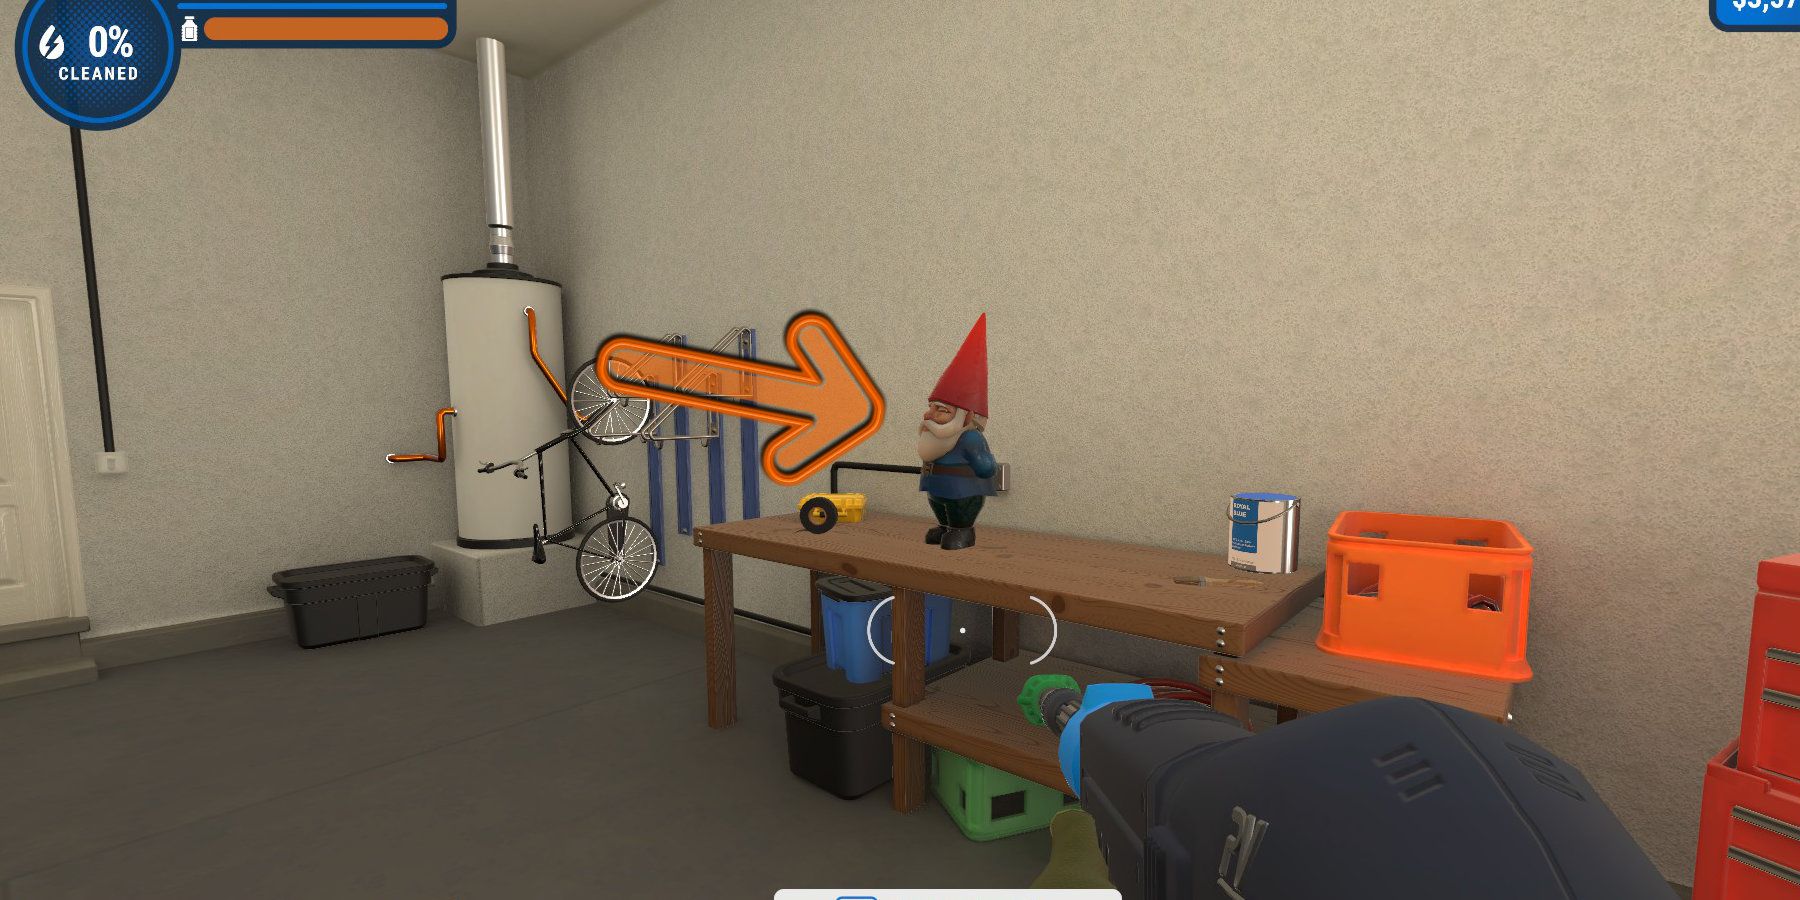 A garden gnome on top of a workbench, highlighted by an arrow.